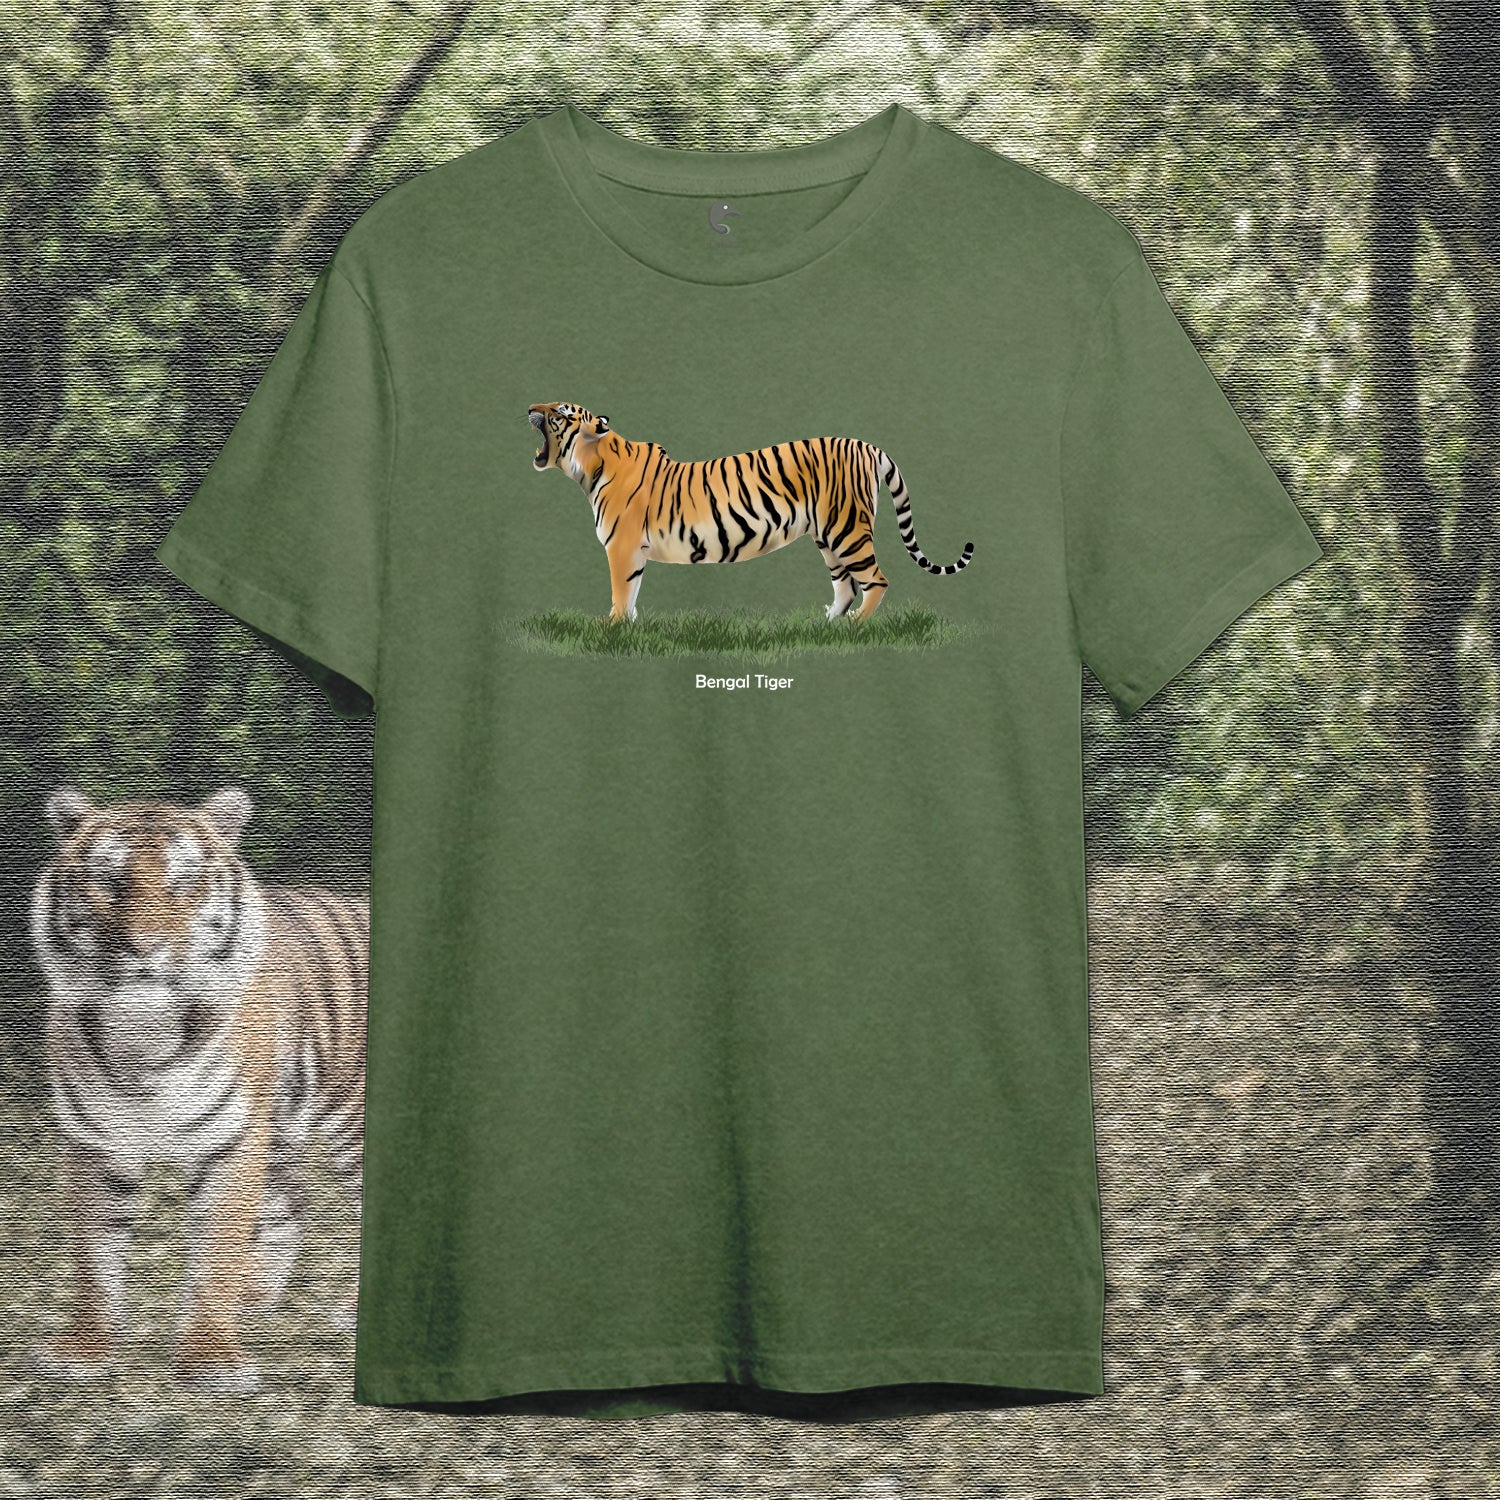 Roar in Style: Tiger Print T-Shirt – Unleash Your Wild Side!